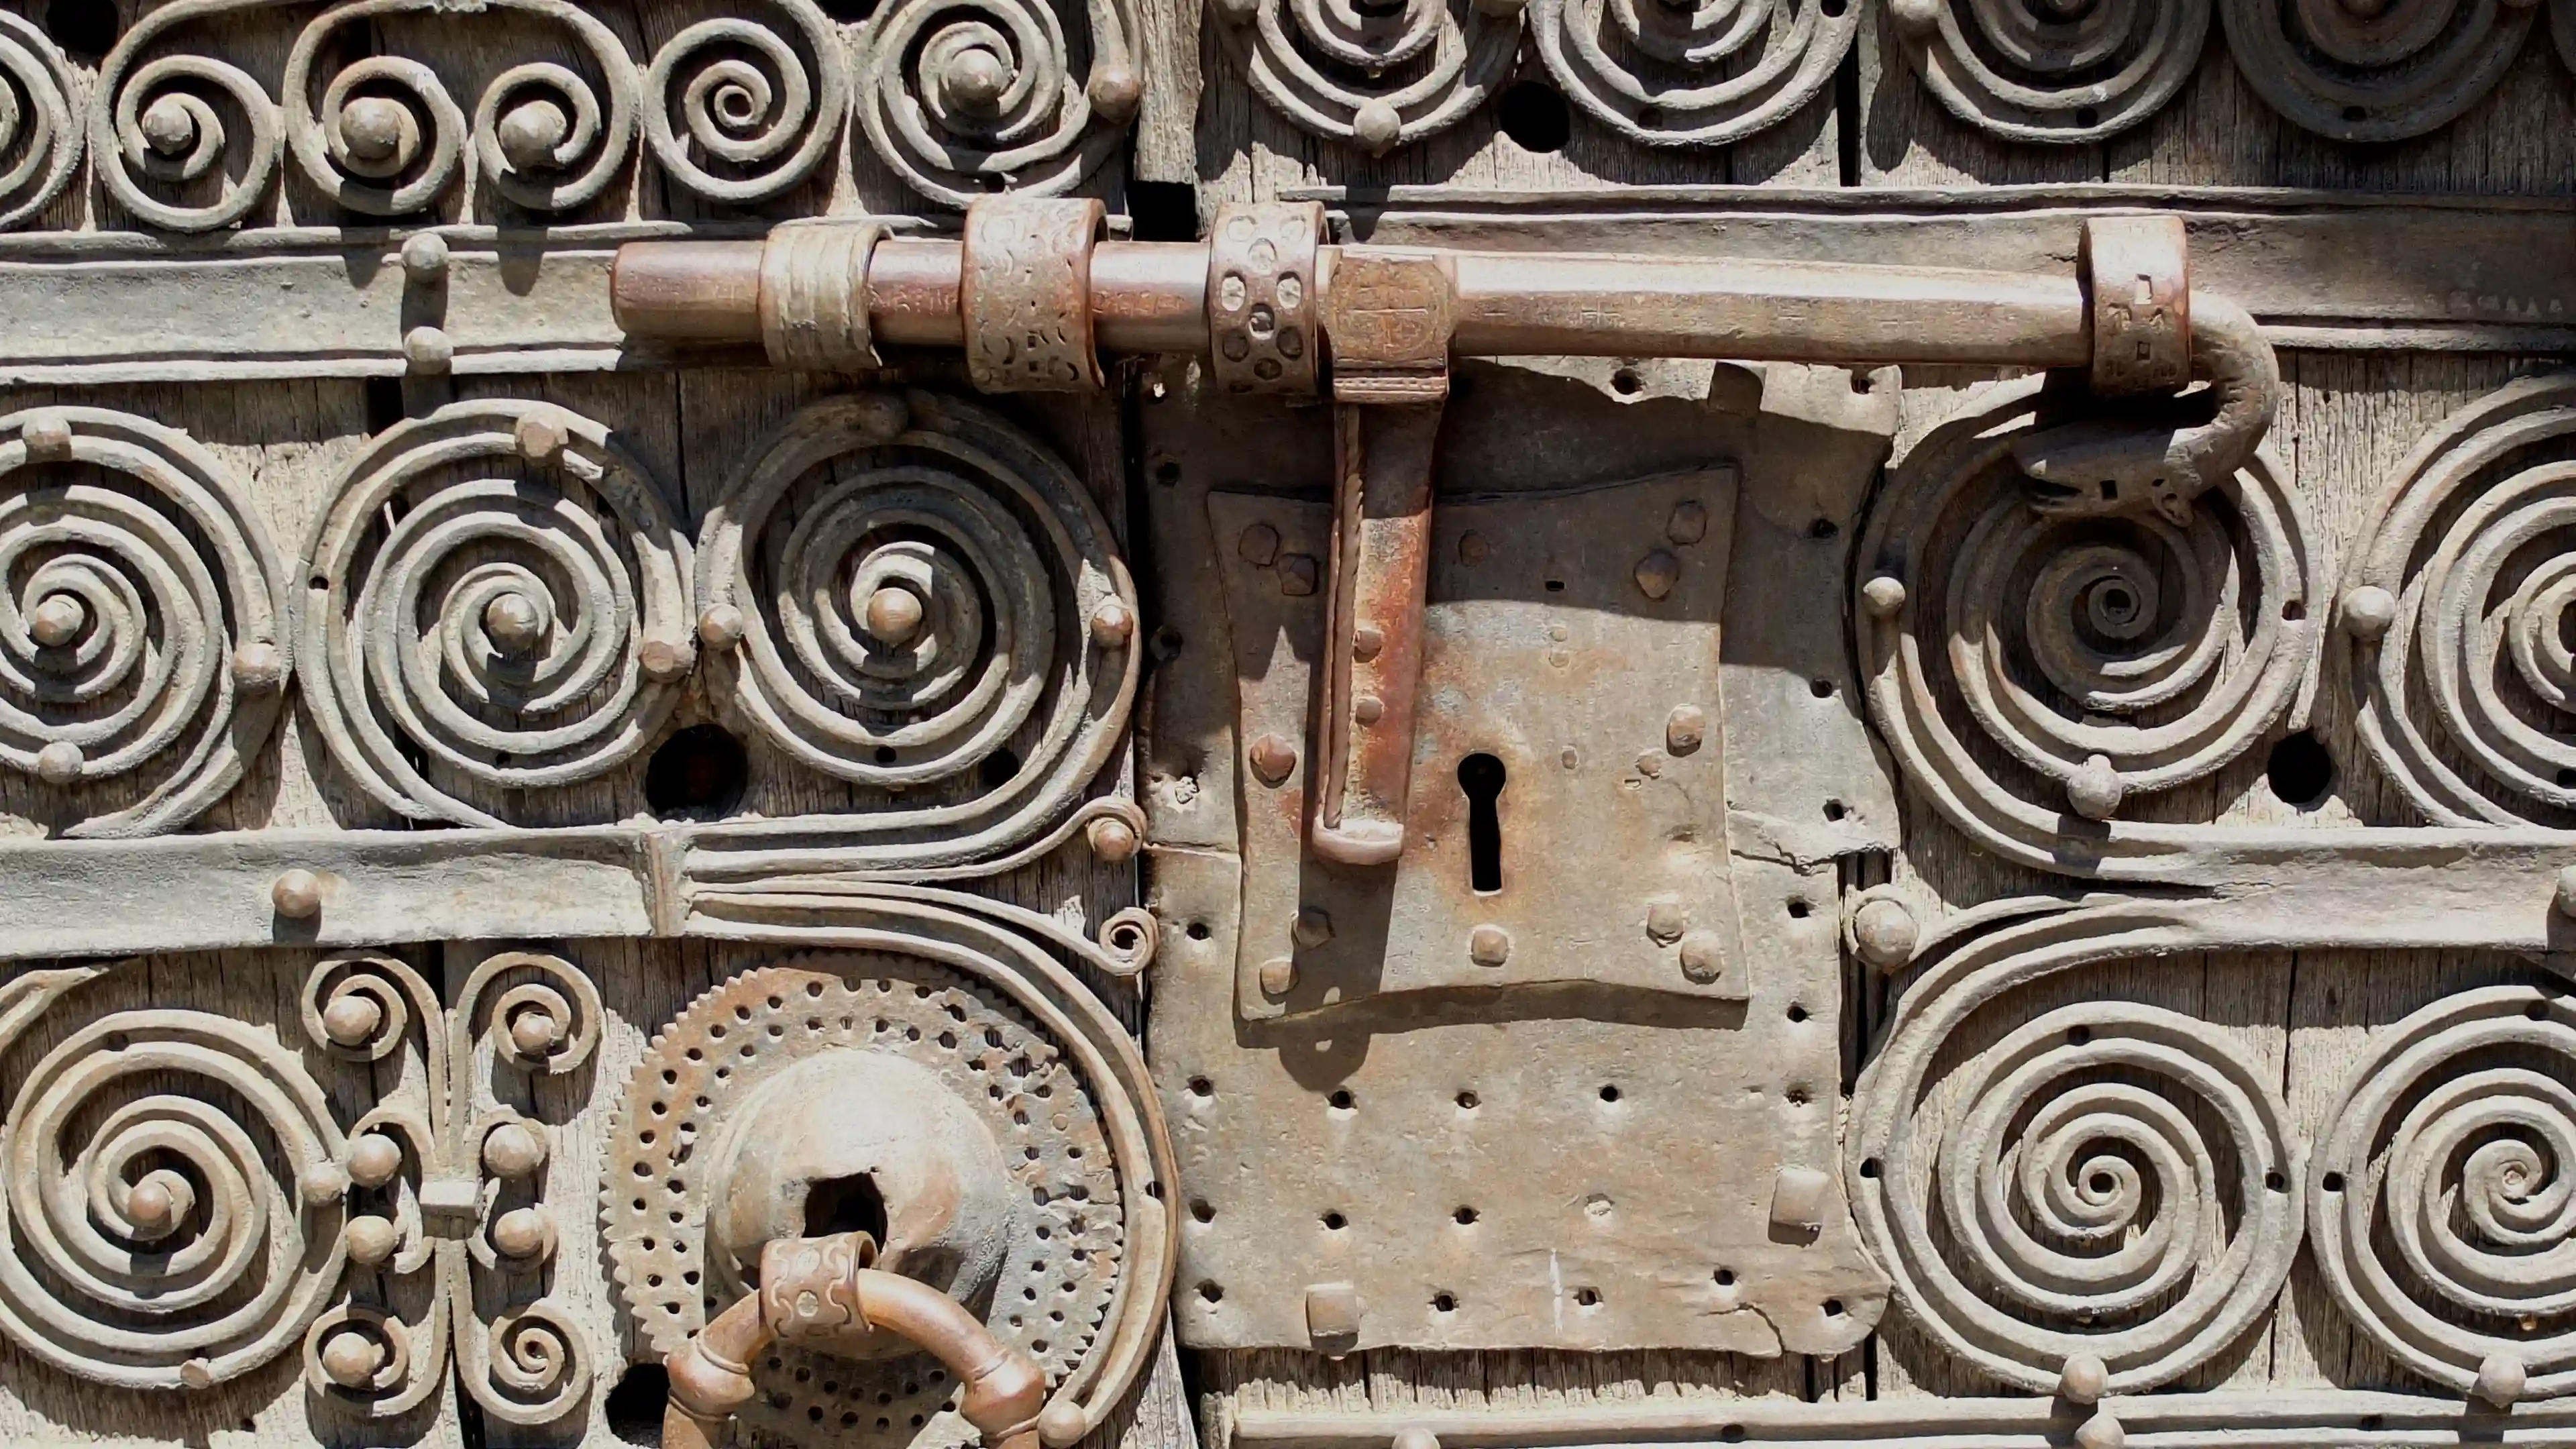 The humans who first invented door locking